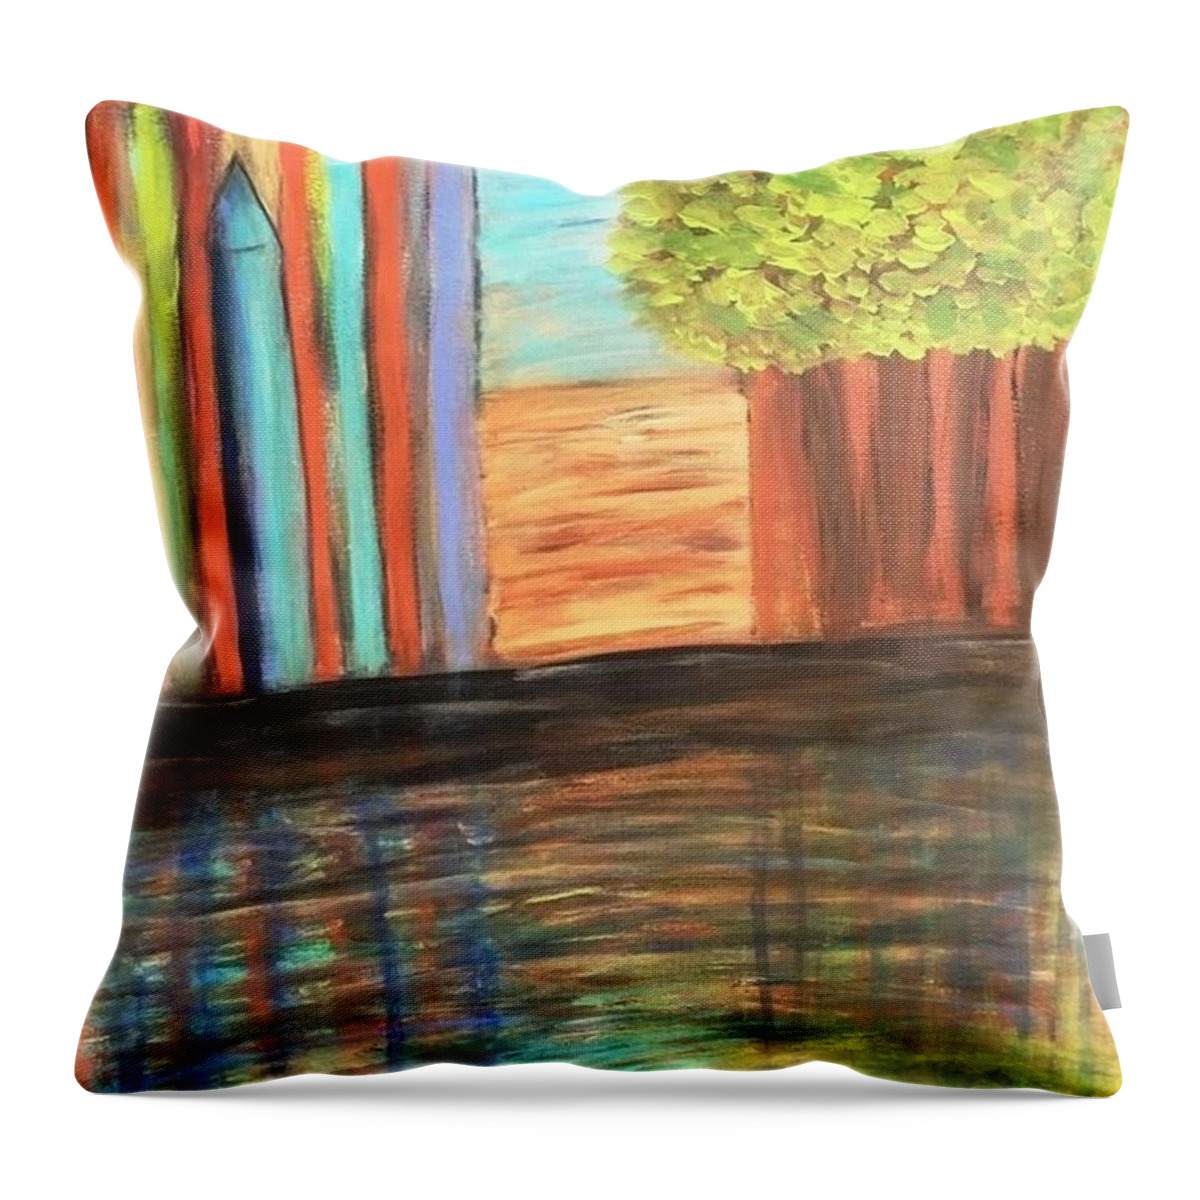  Throw Pillow featuring the painting Citadel by Mihaela CD